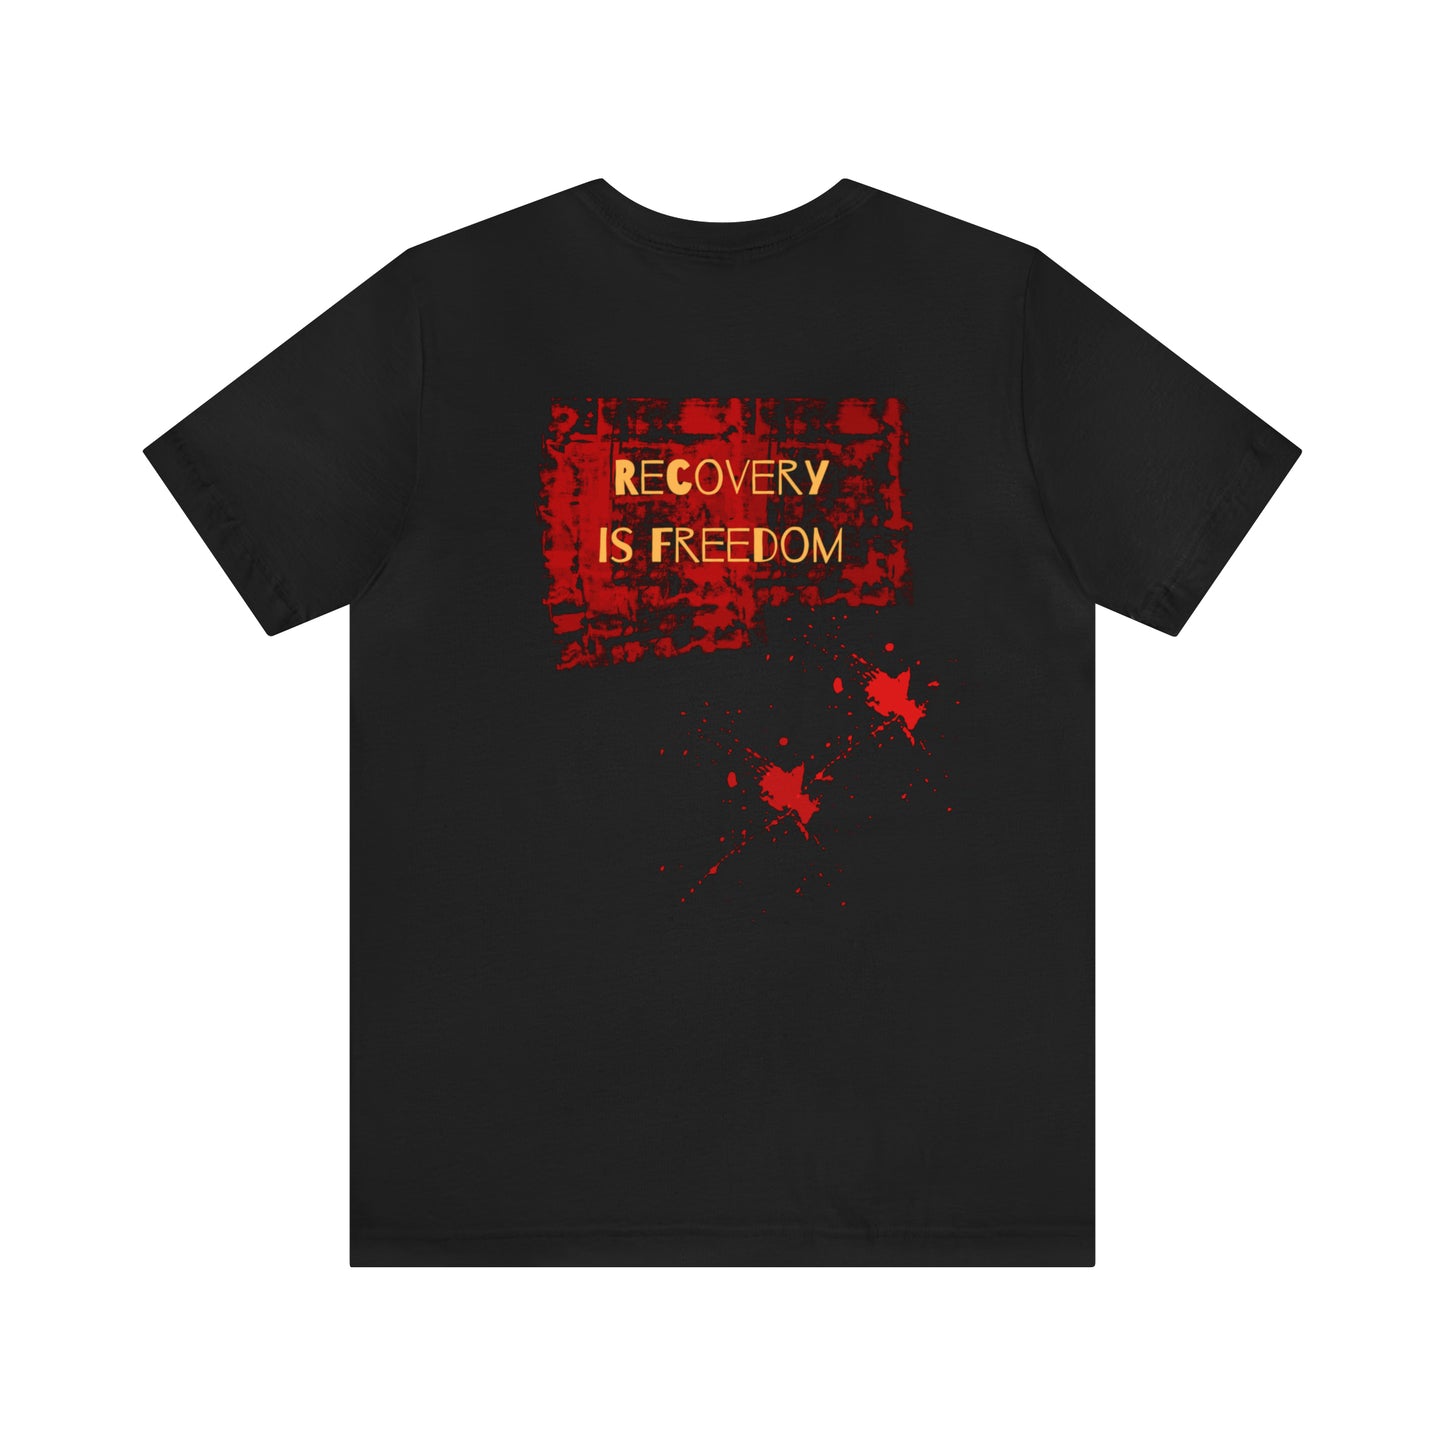 Sober tee from Celebrate Sobriety Gifts.com